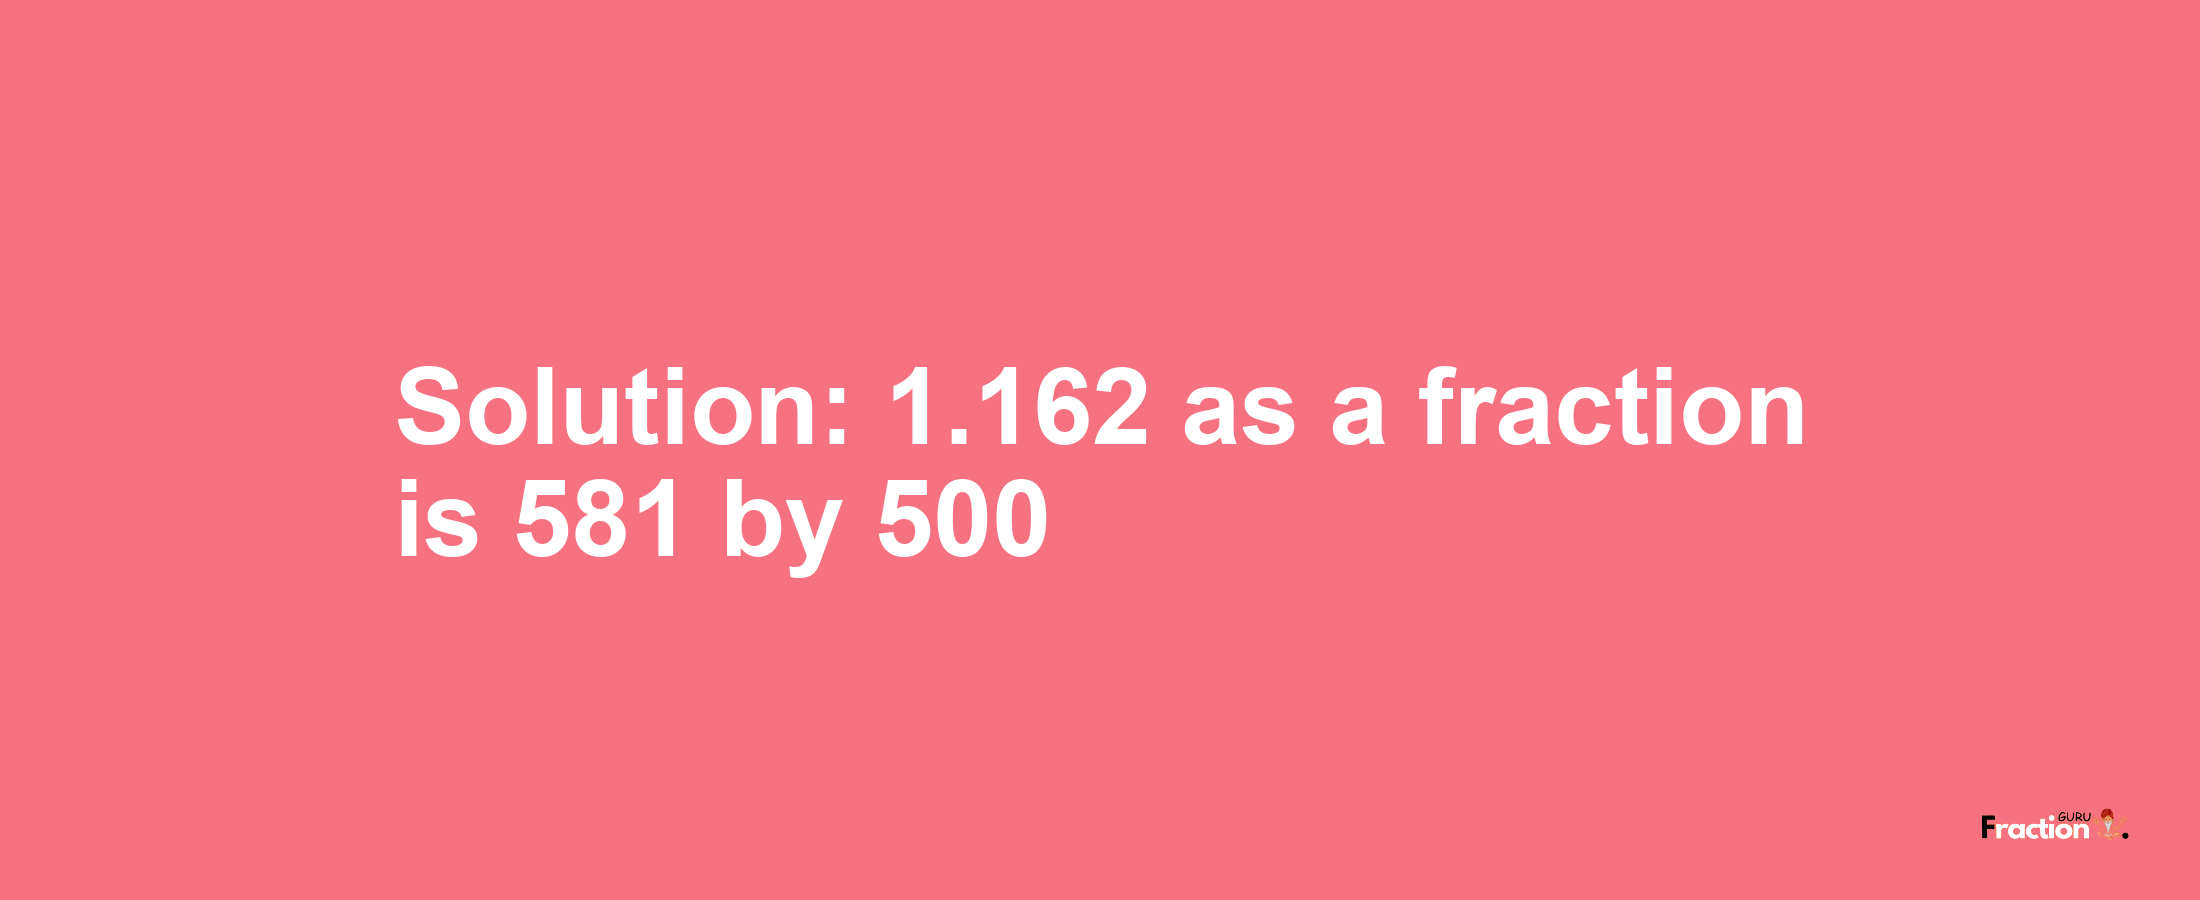 Solution:1.162 as a fraction is 581/500